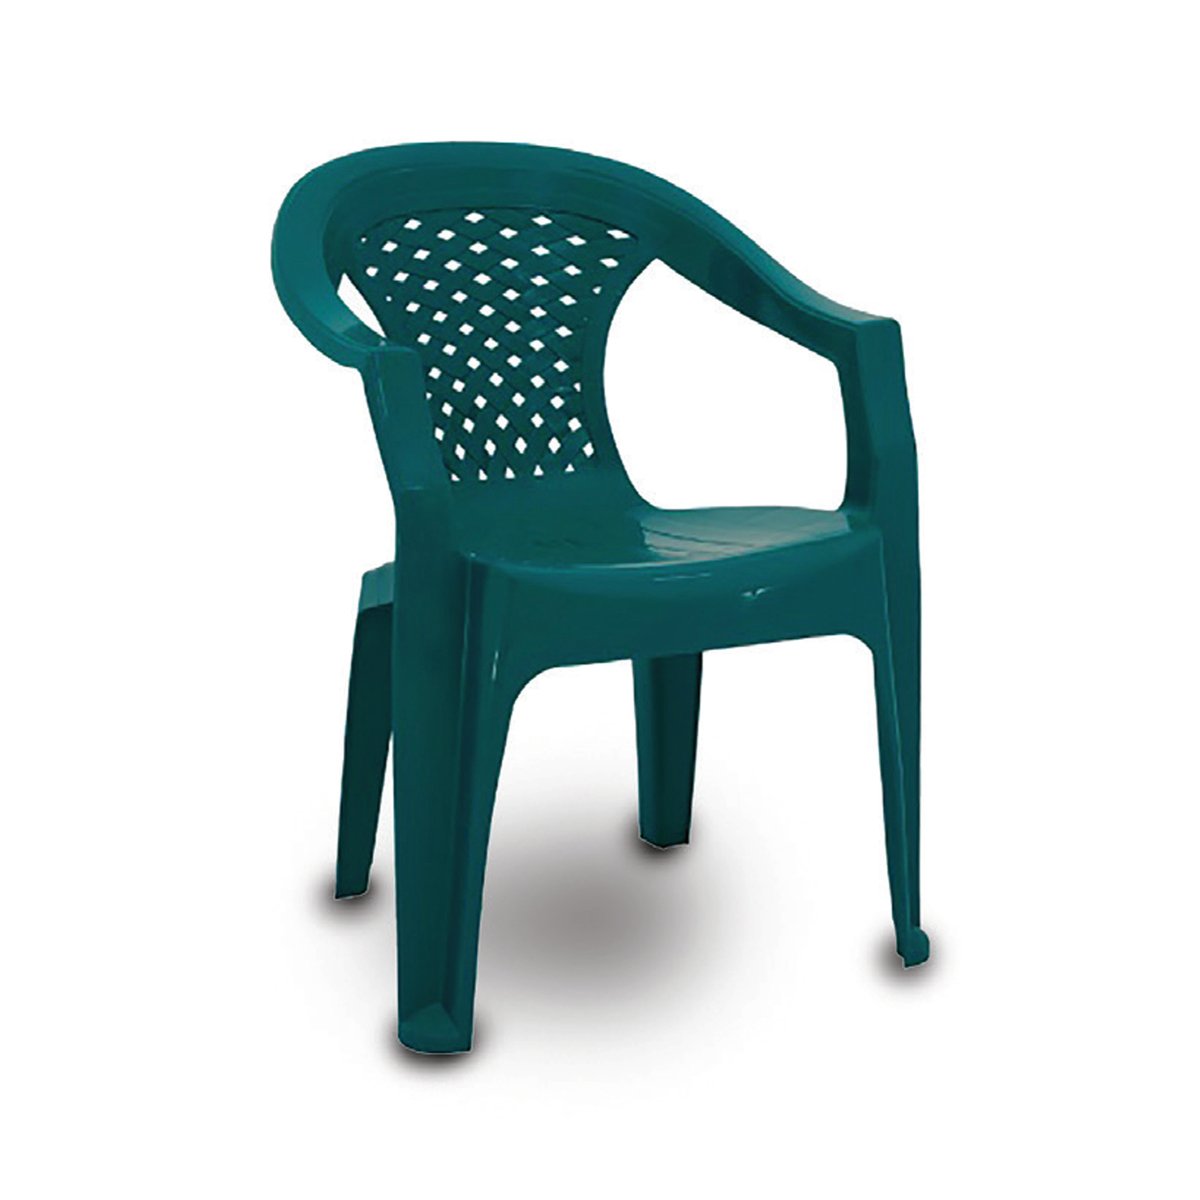 Saglam Outdoor Arm Chair Lale 505 Assorted Colors